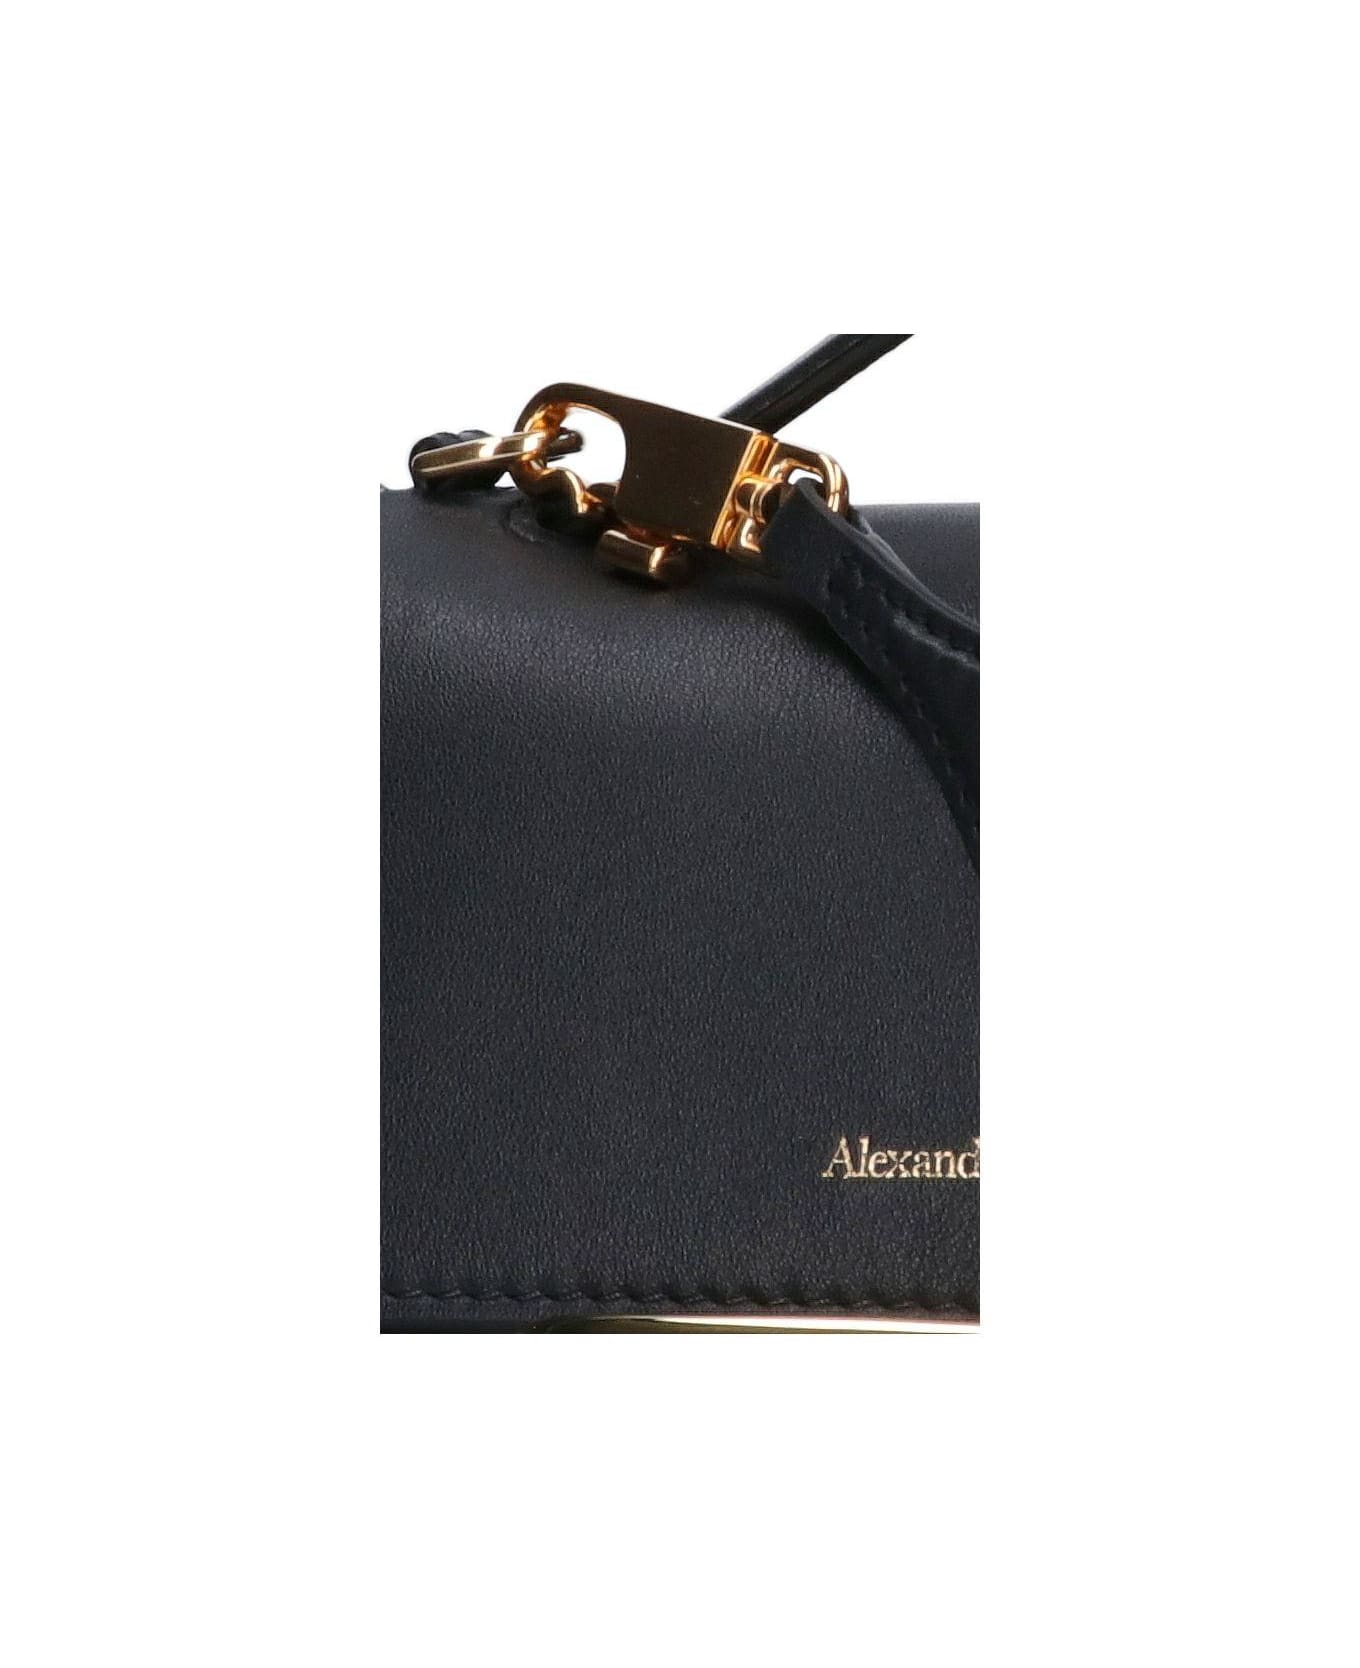 Alexander McQueen The Story Bag - What are some things you carry in your bag everyday that you cant live without